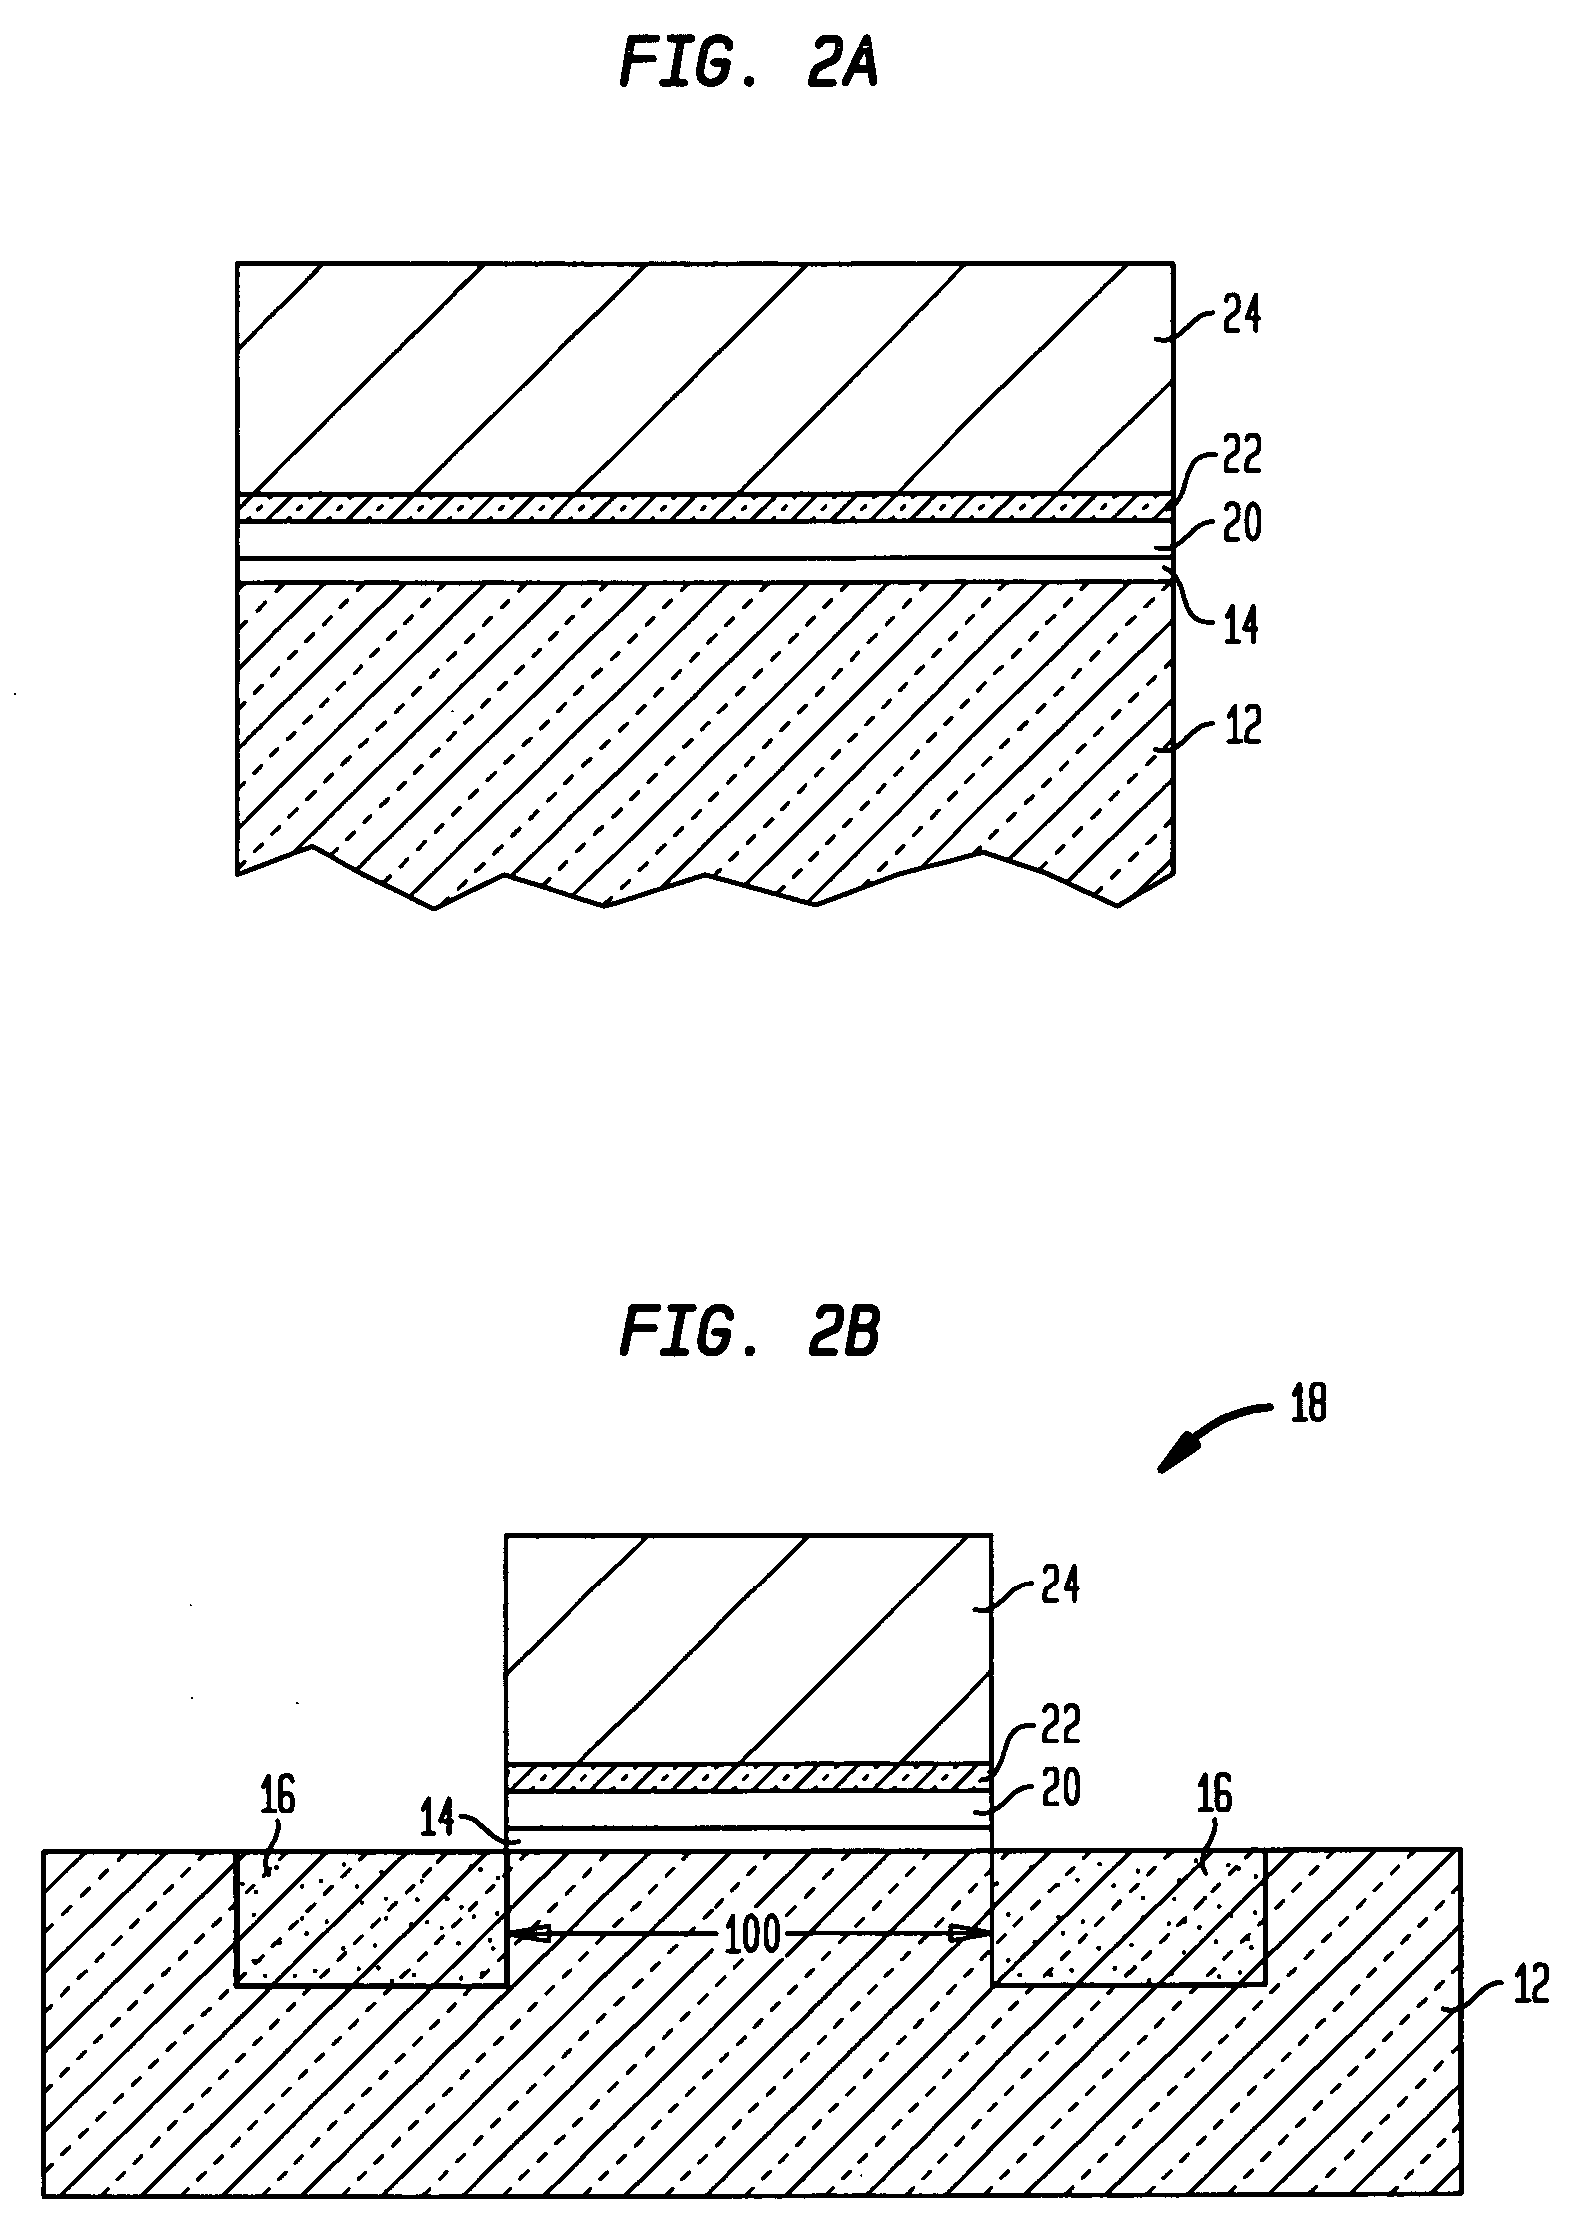 Low threshold voltage semiconductor device with dual threshold voltage control means